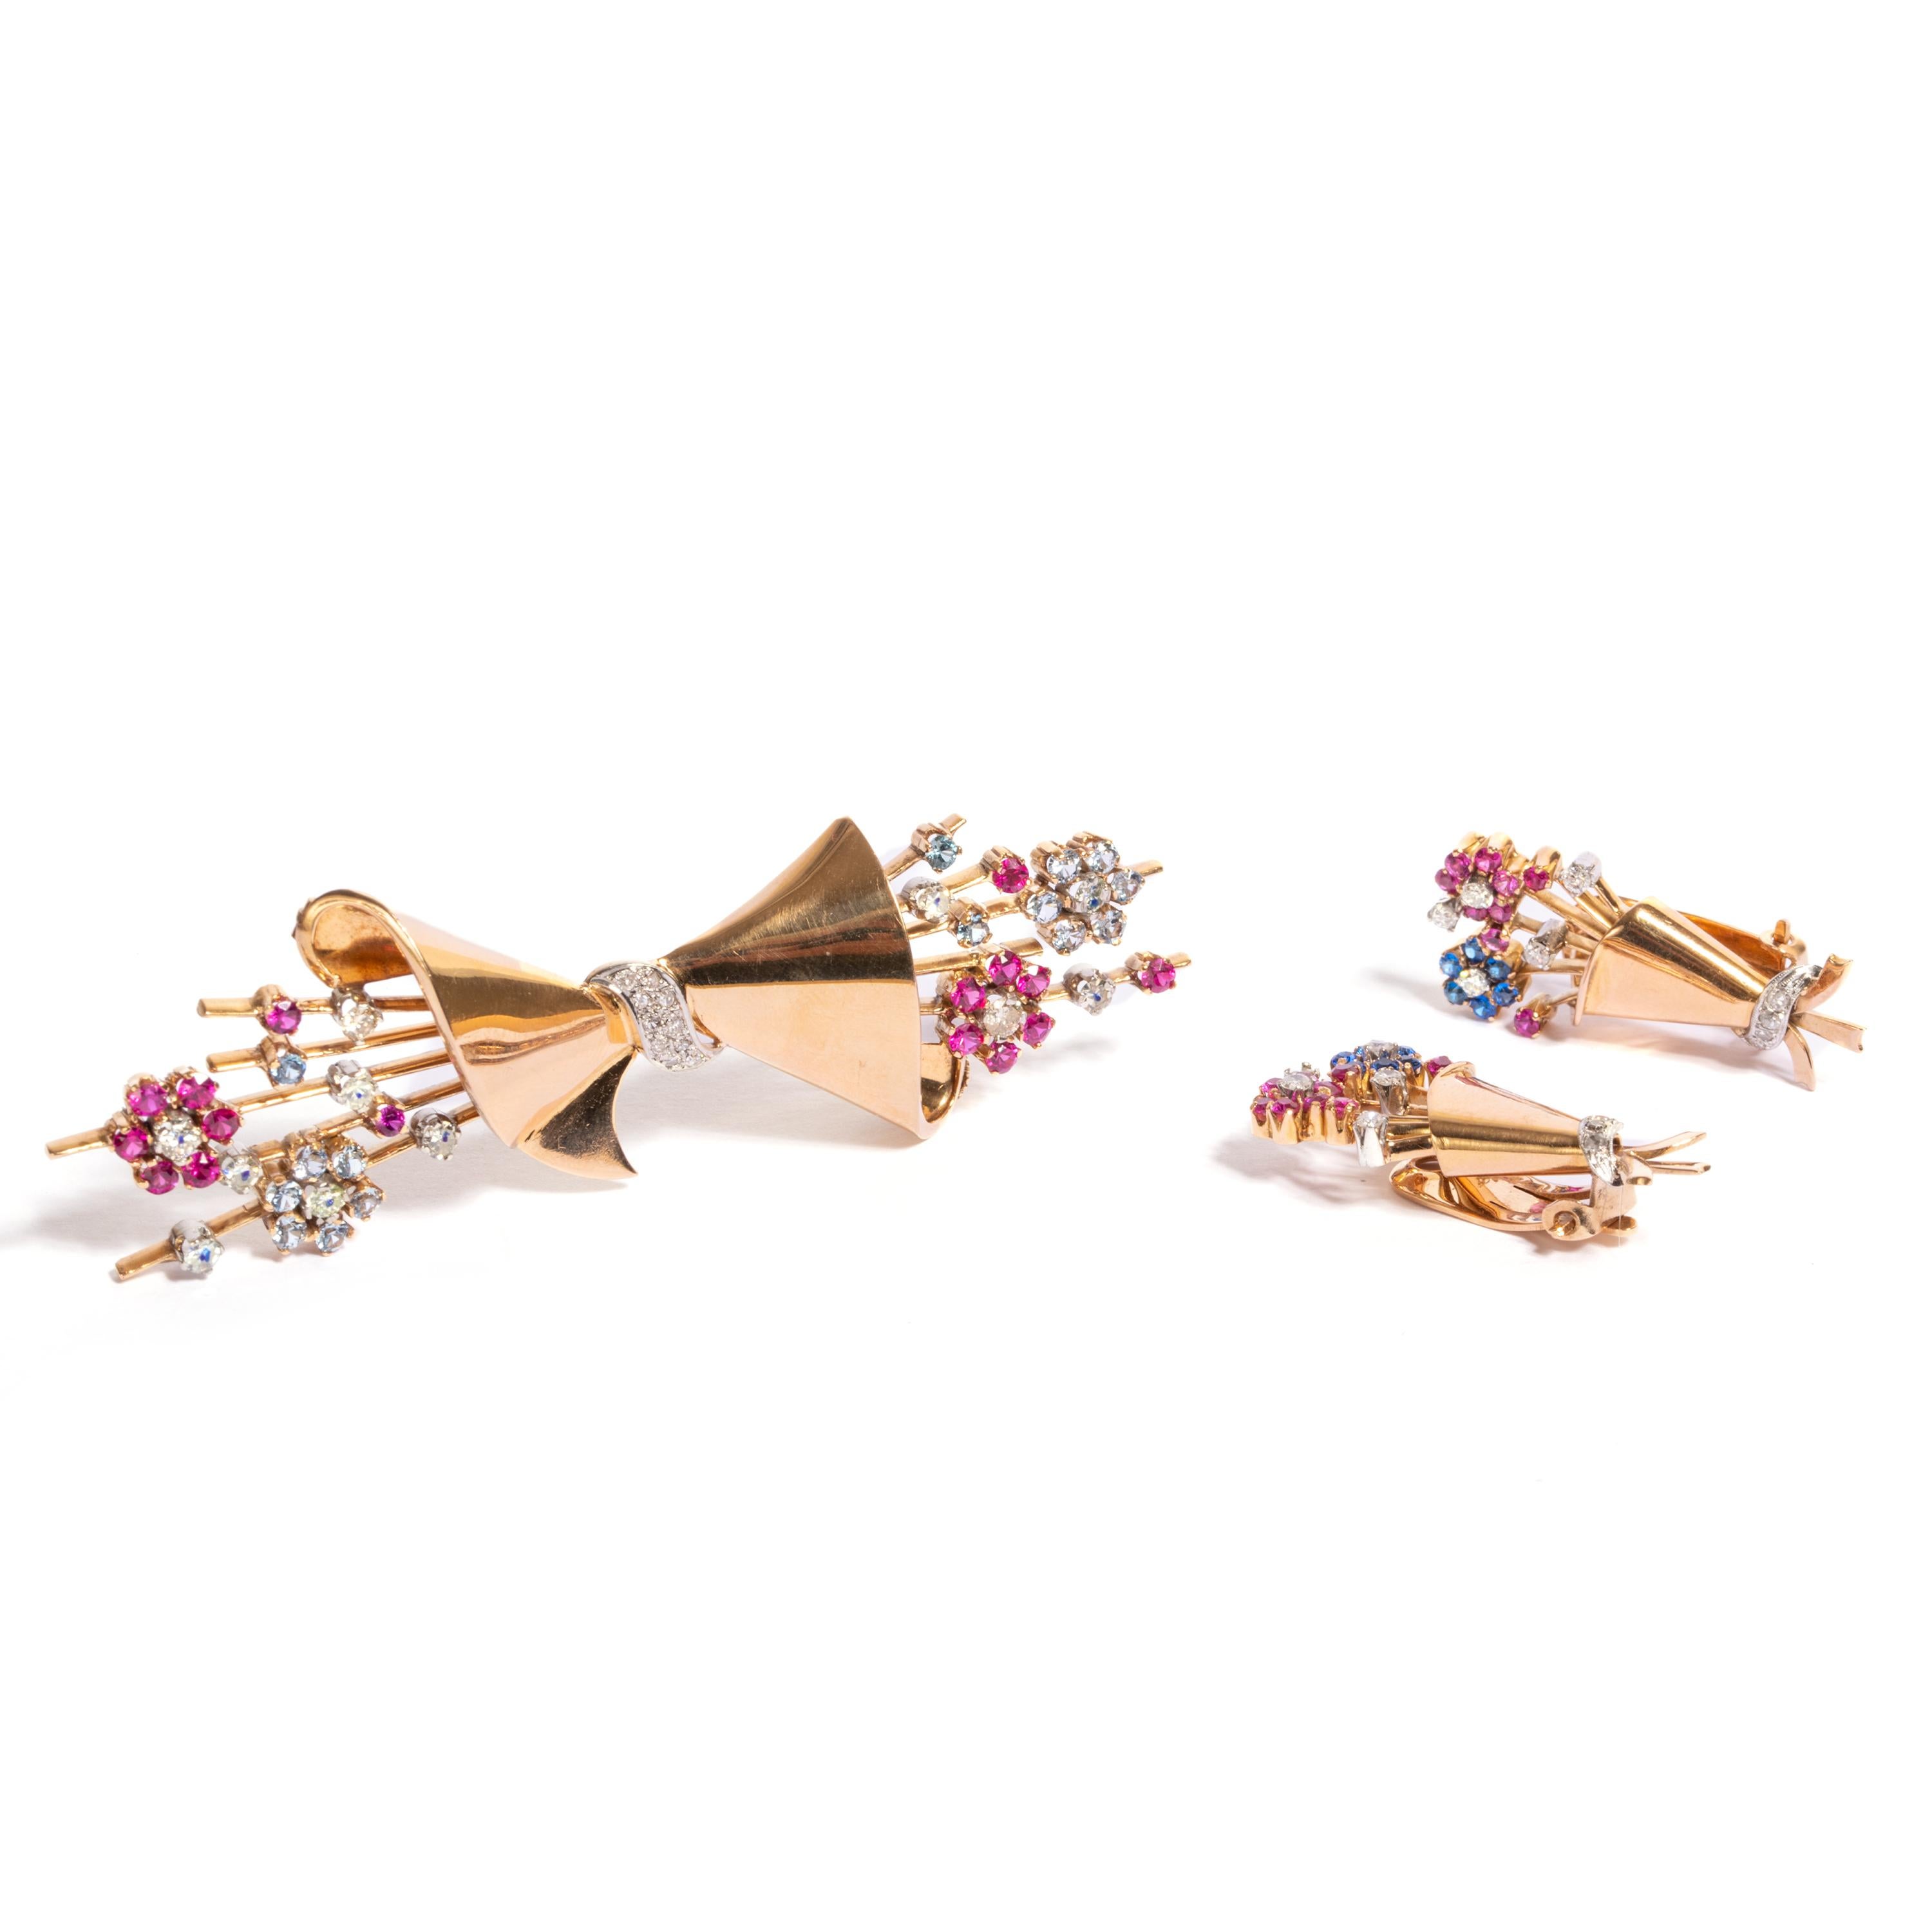 Parure 18 Kt gold brooch and earrings, Italian manufacture, 1940s.Beautiful bouquet design decorated with gemstones. 
brooch size: 10 cm x 2,5 cm
earrings size 4 cm x 1,5 cm 
40 gr
